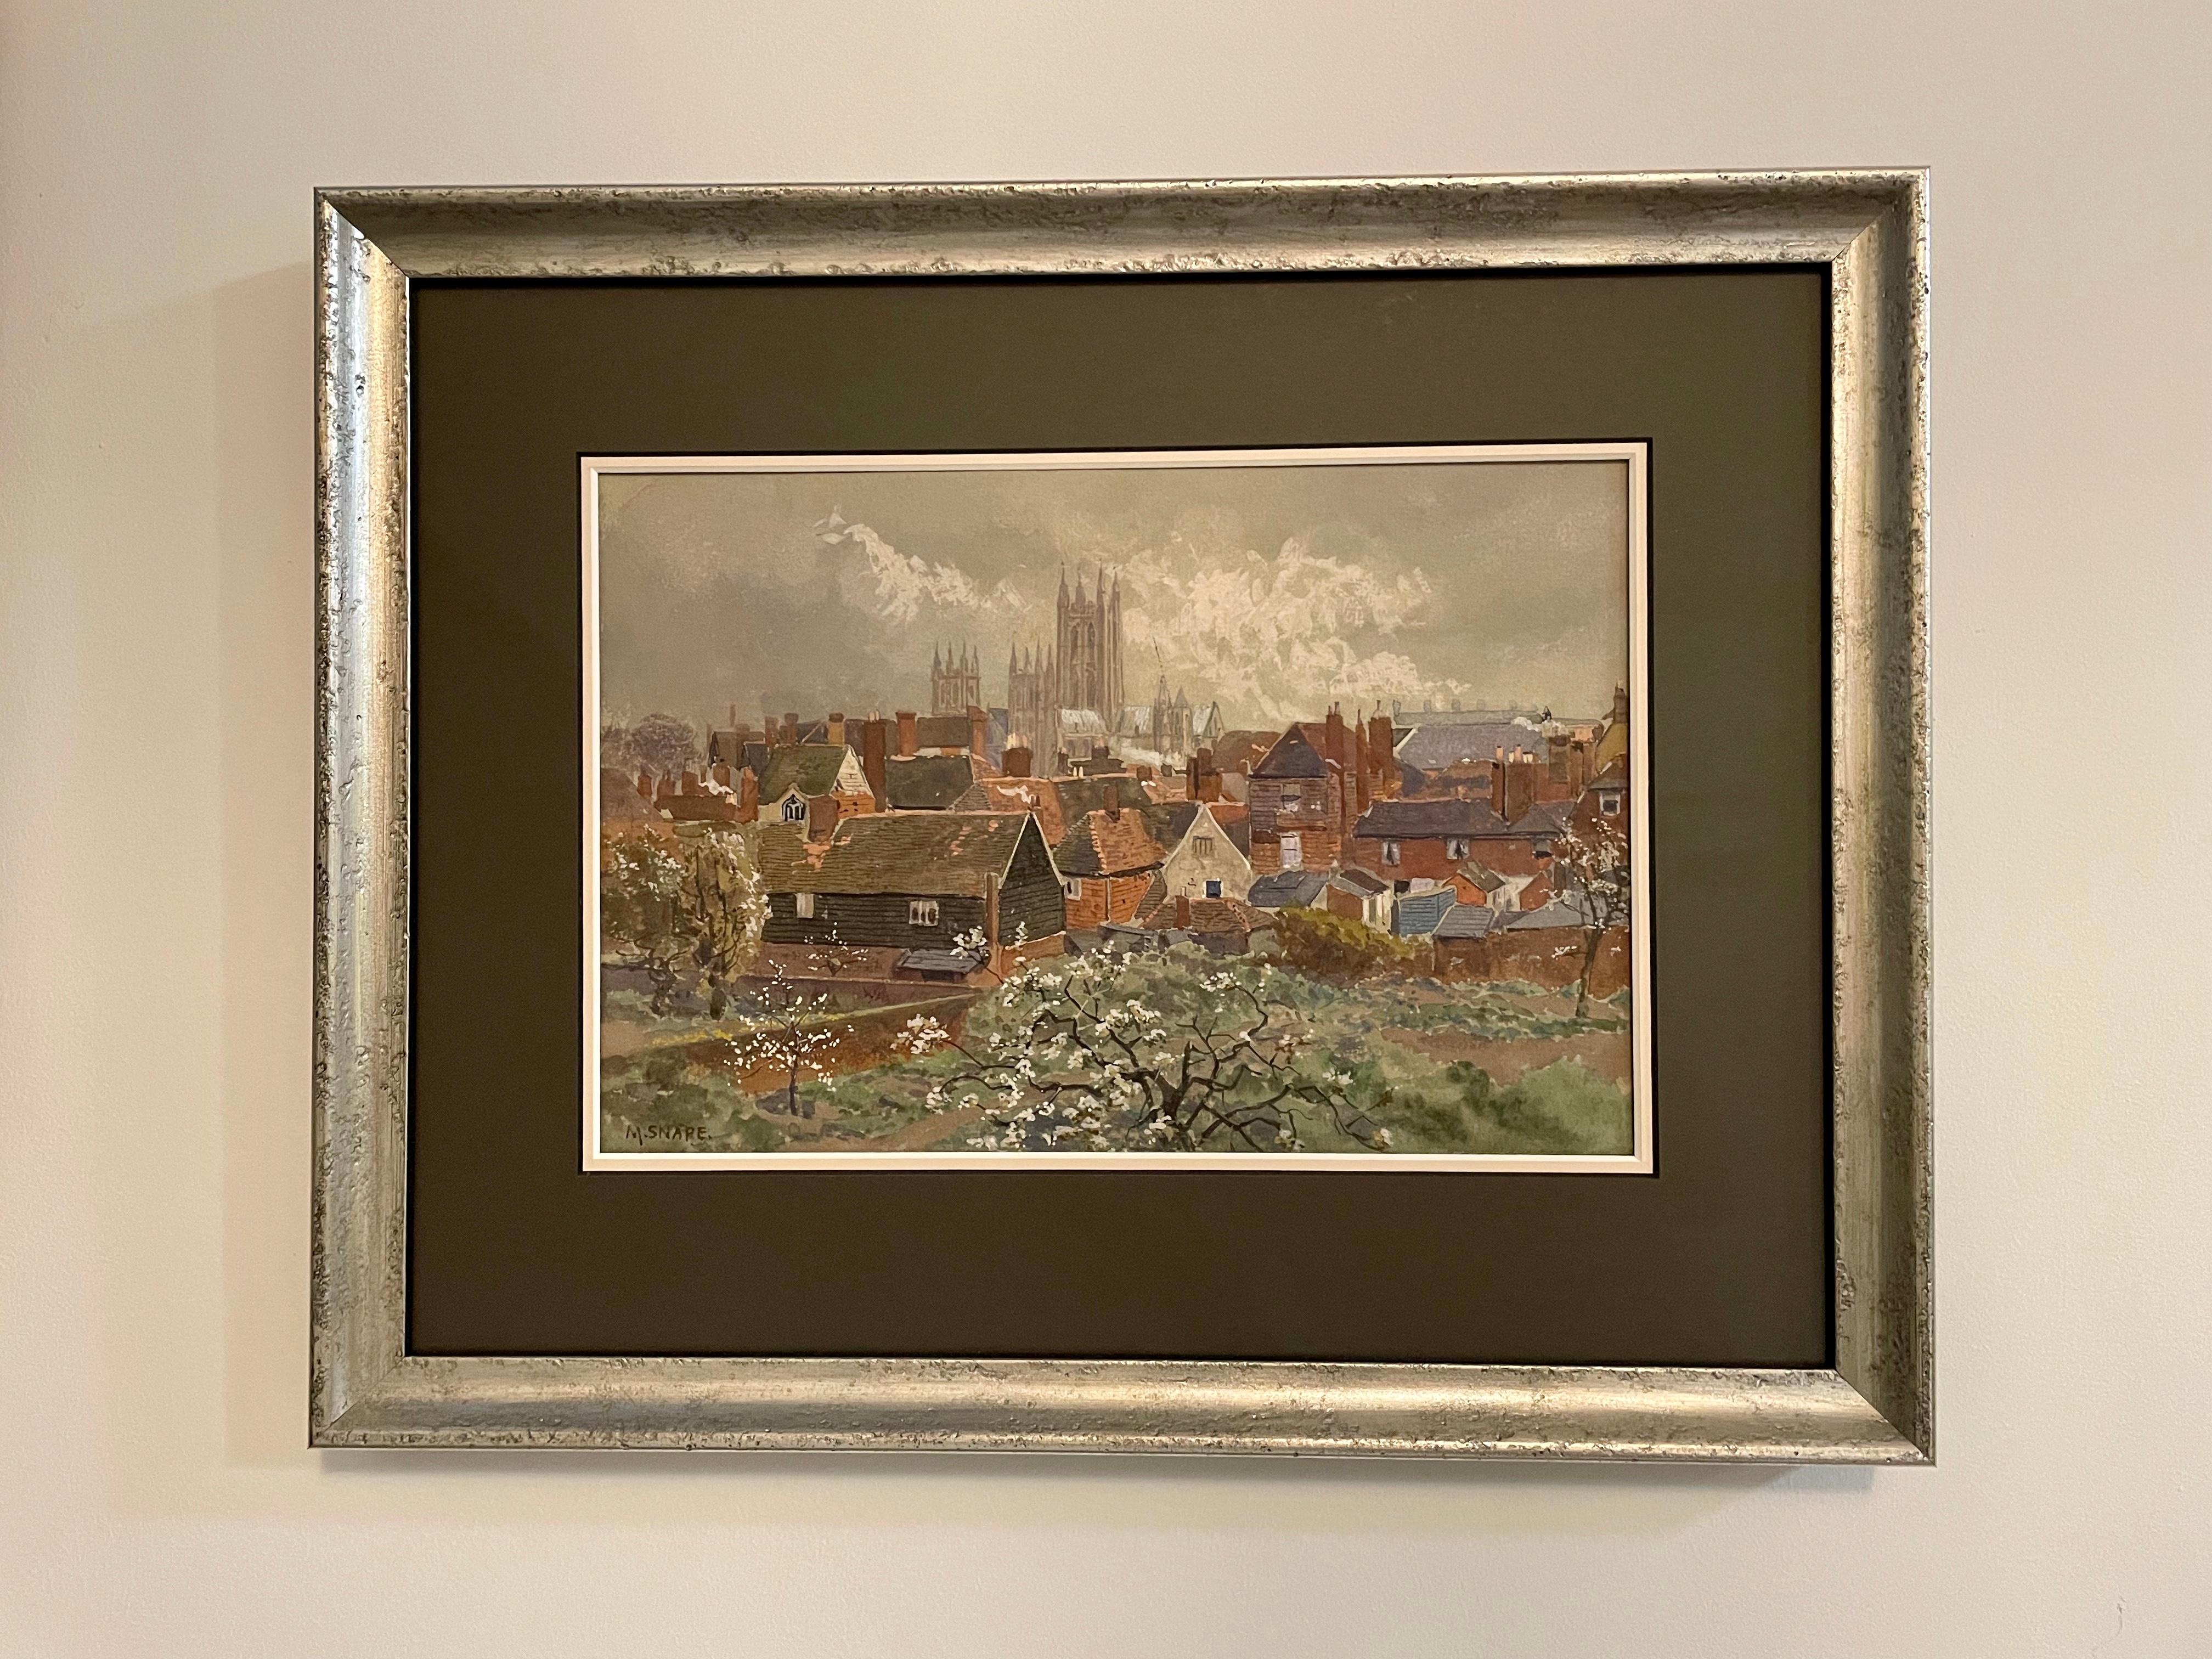 A watercolour of Canterbury Cathedral and the surrounding area, by the renowned artist Martin Snape. 
Martin Snape was born in Gosport, Hampshire in 1899 and attended Burney’s Academy. He became an accomplished painter, particularly of the local